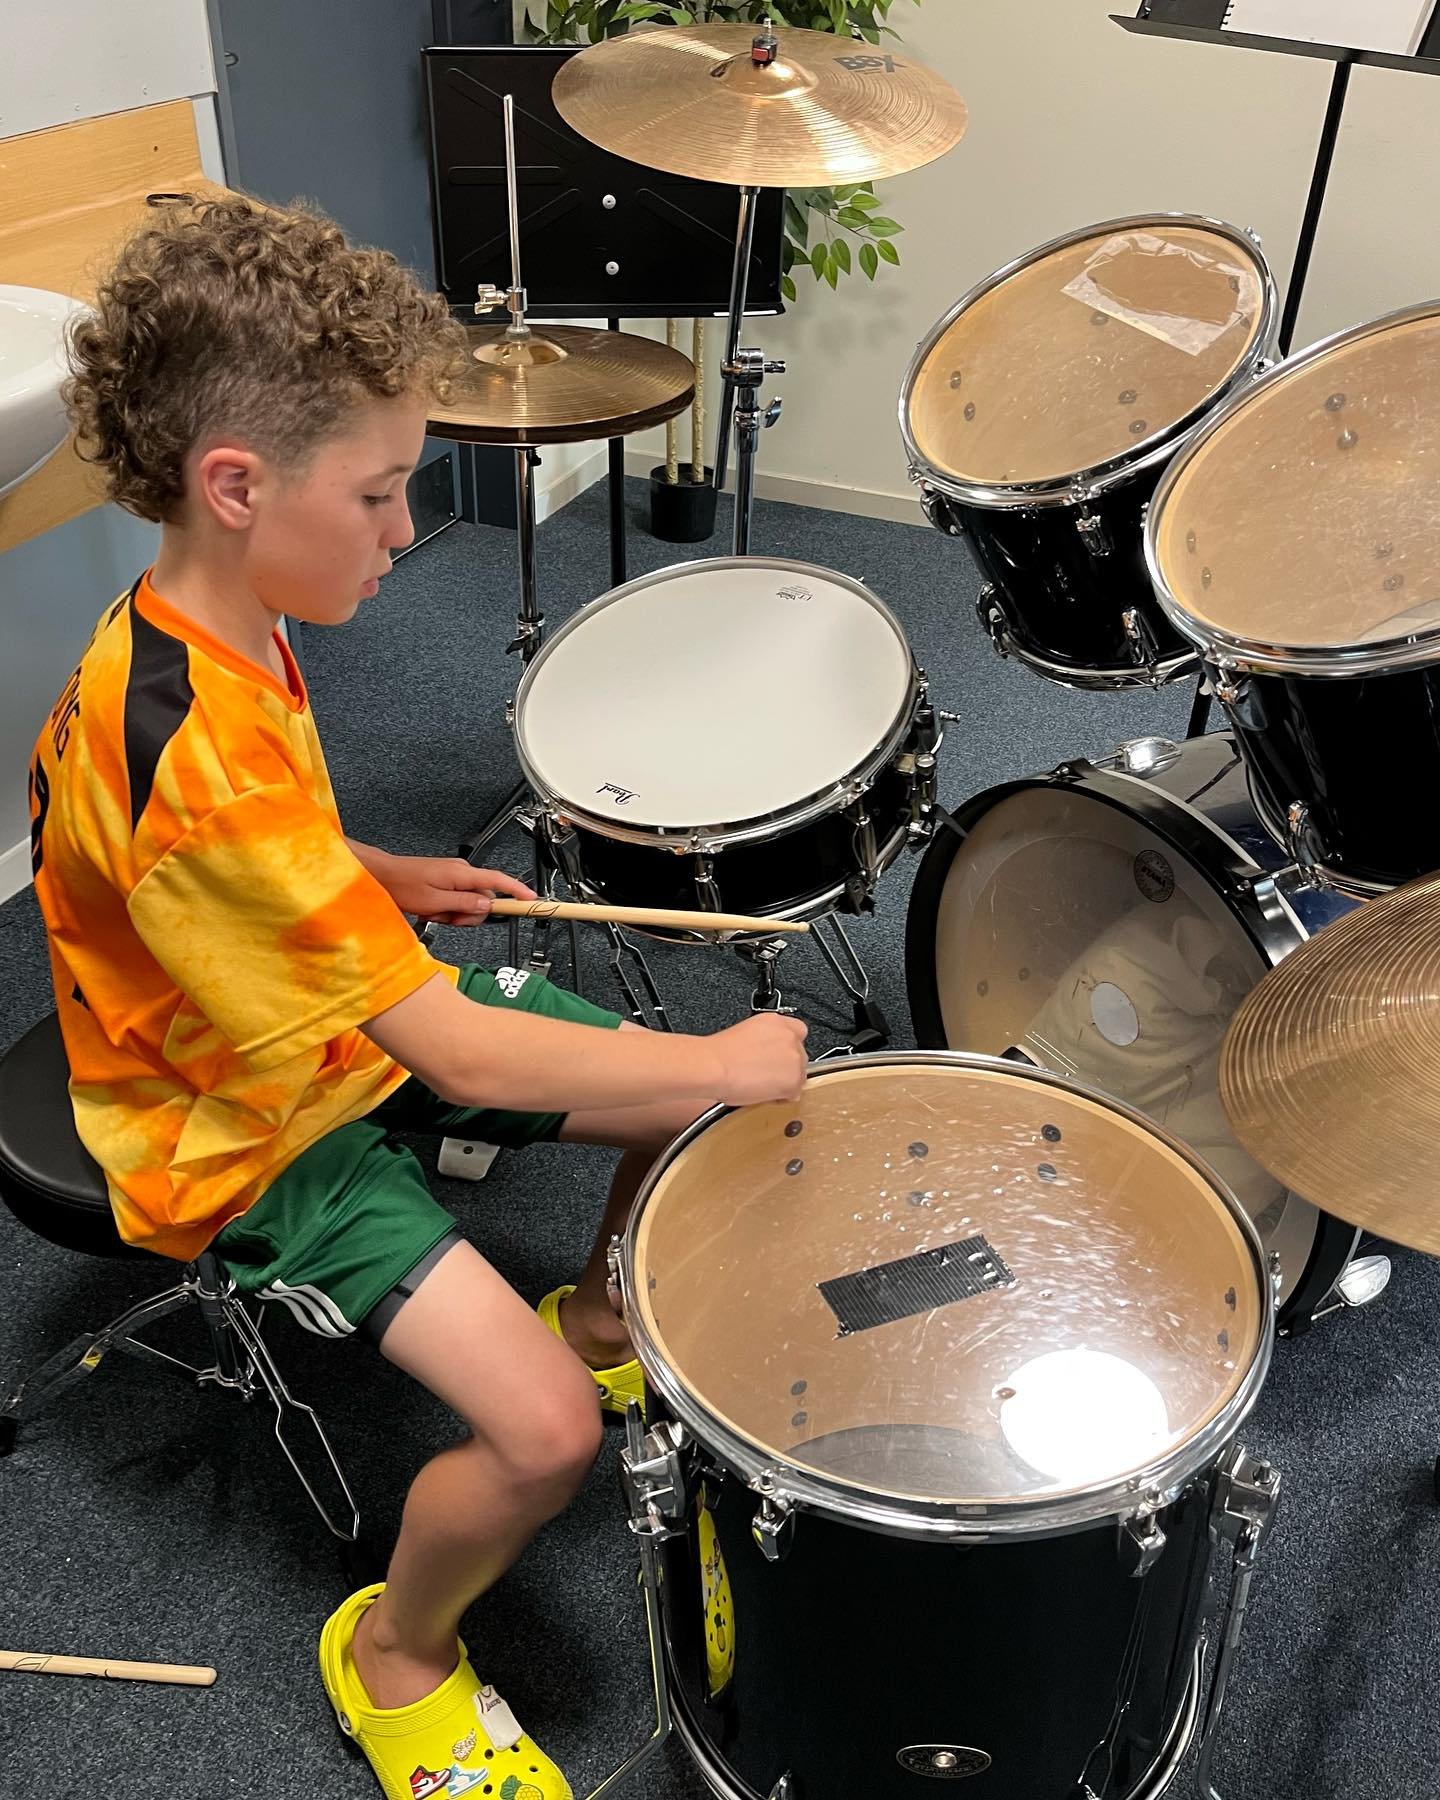 Did you know that drums need to be tuned?! Here&rsquo;s Levi learning how to tune a drum kit! 

During my years teaching drums, I have noticed how drums are commonly taught for convenience using electronic drum kits, and also by tutors that don&rsquo